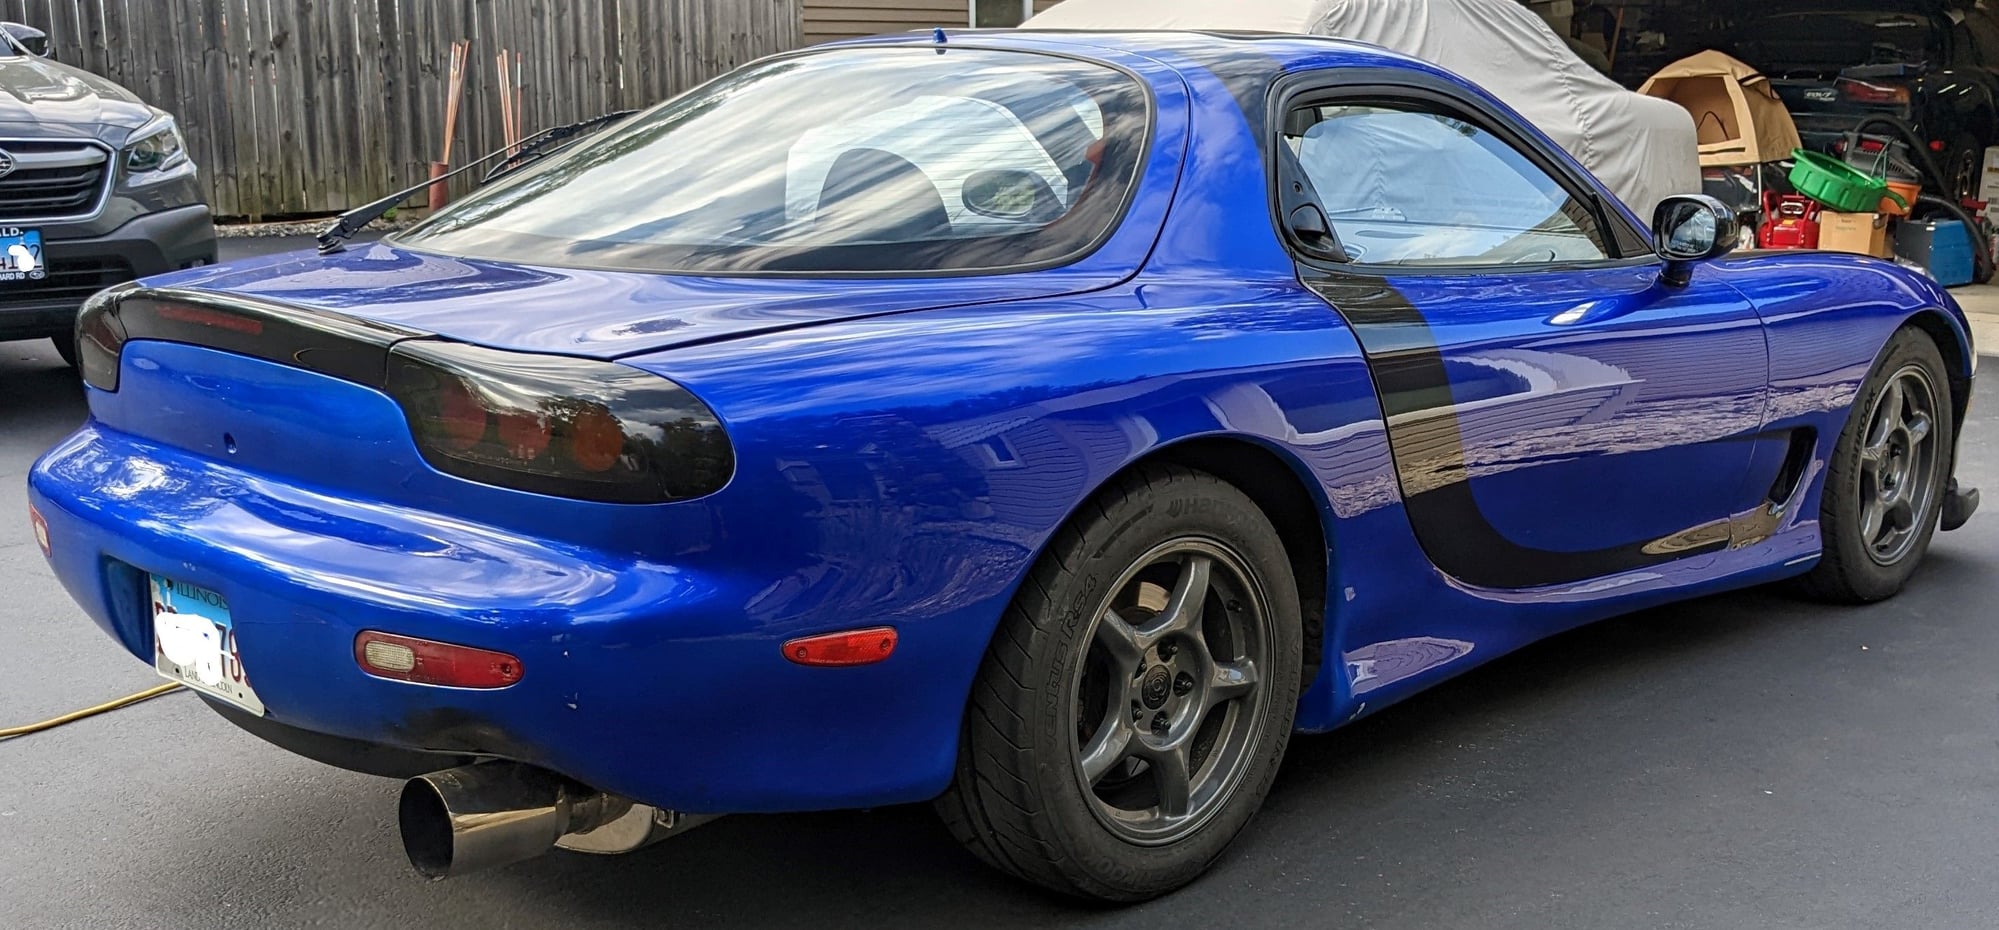 1994 Mazda RX-7 - 1994 FD RX-7 LSx "Beater with a heater" - Used - VIN JM1FD3338R0301604 - 100,000 Miles - 8 cyl - 2WD - Manual - Coupe - Blue - Oak Park, IL 60302, United States